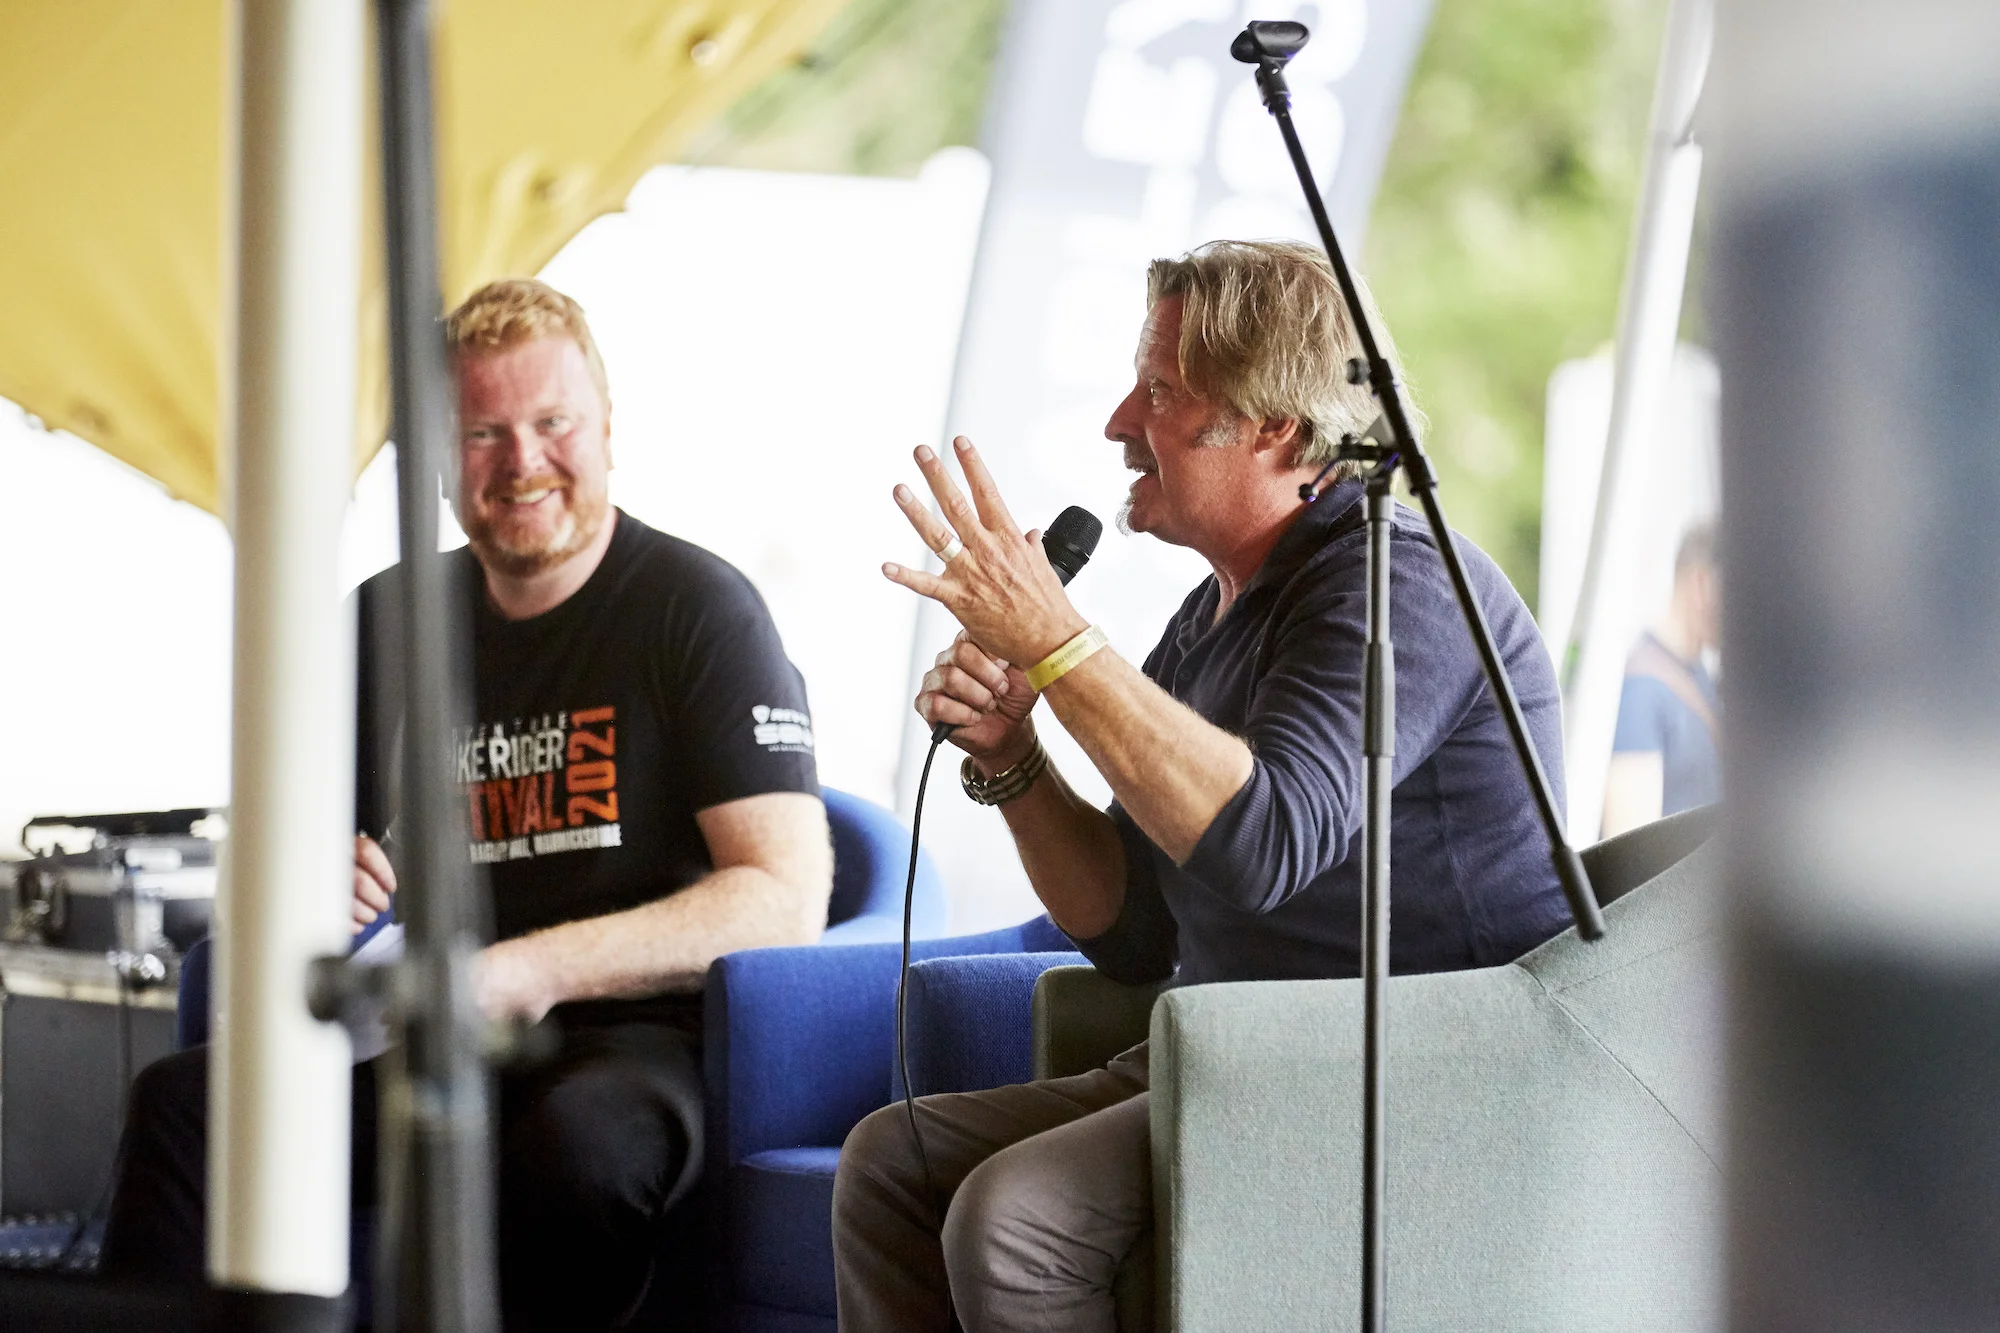 Charley Boorman speaking on the main stage at the Adventure Bike Rider Festival